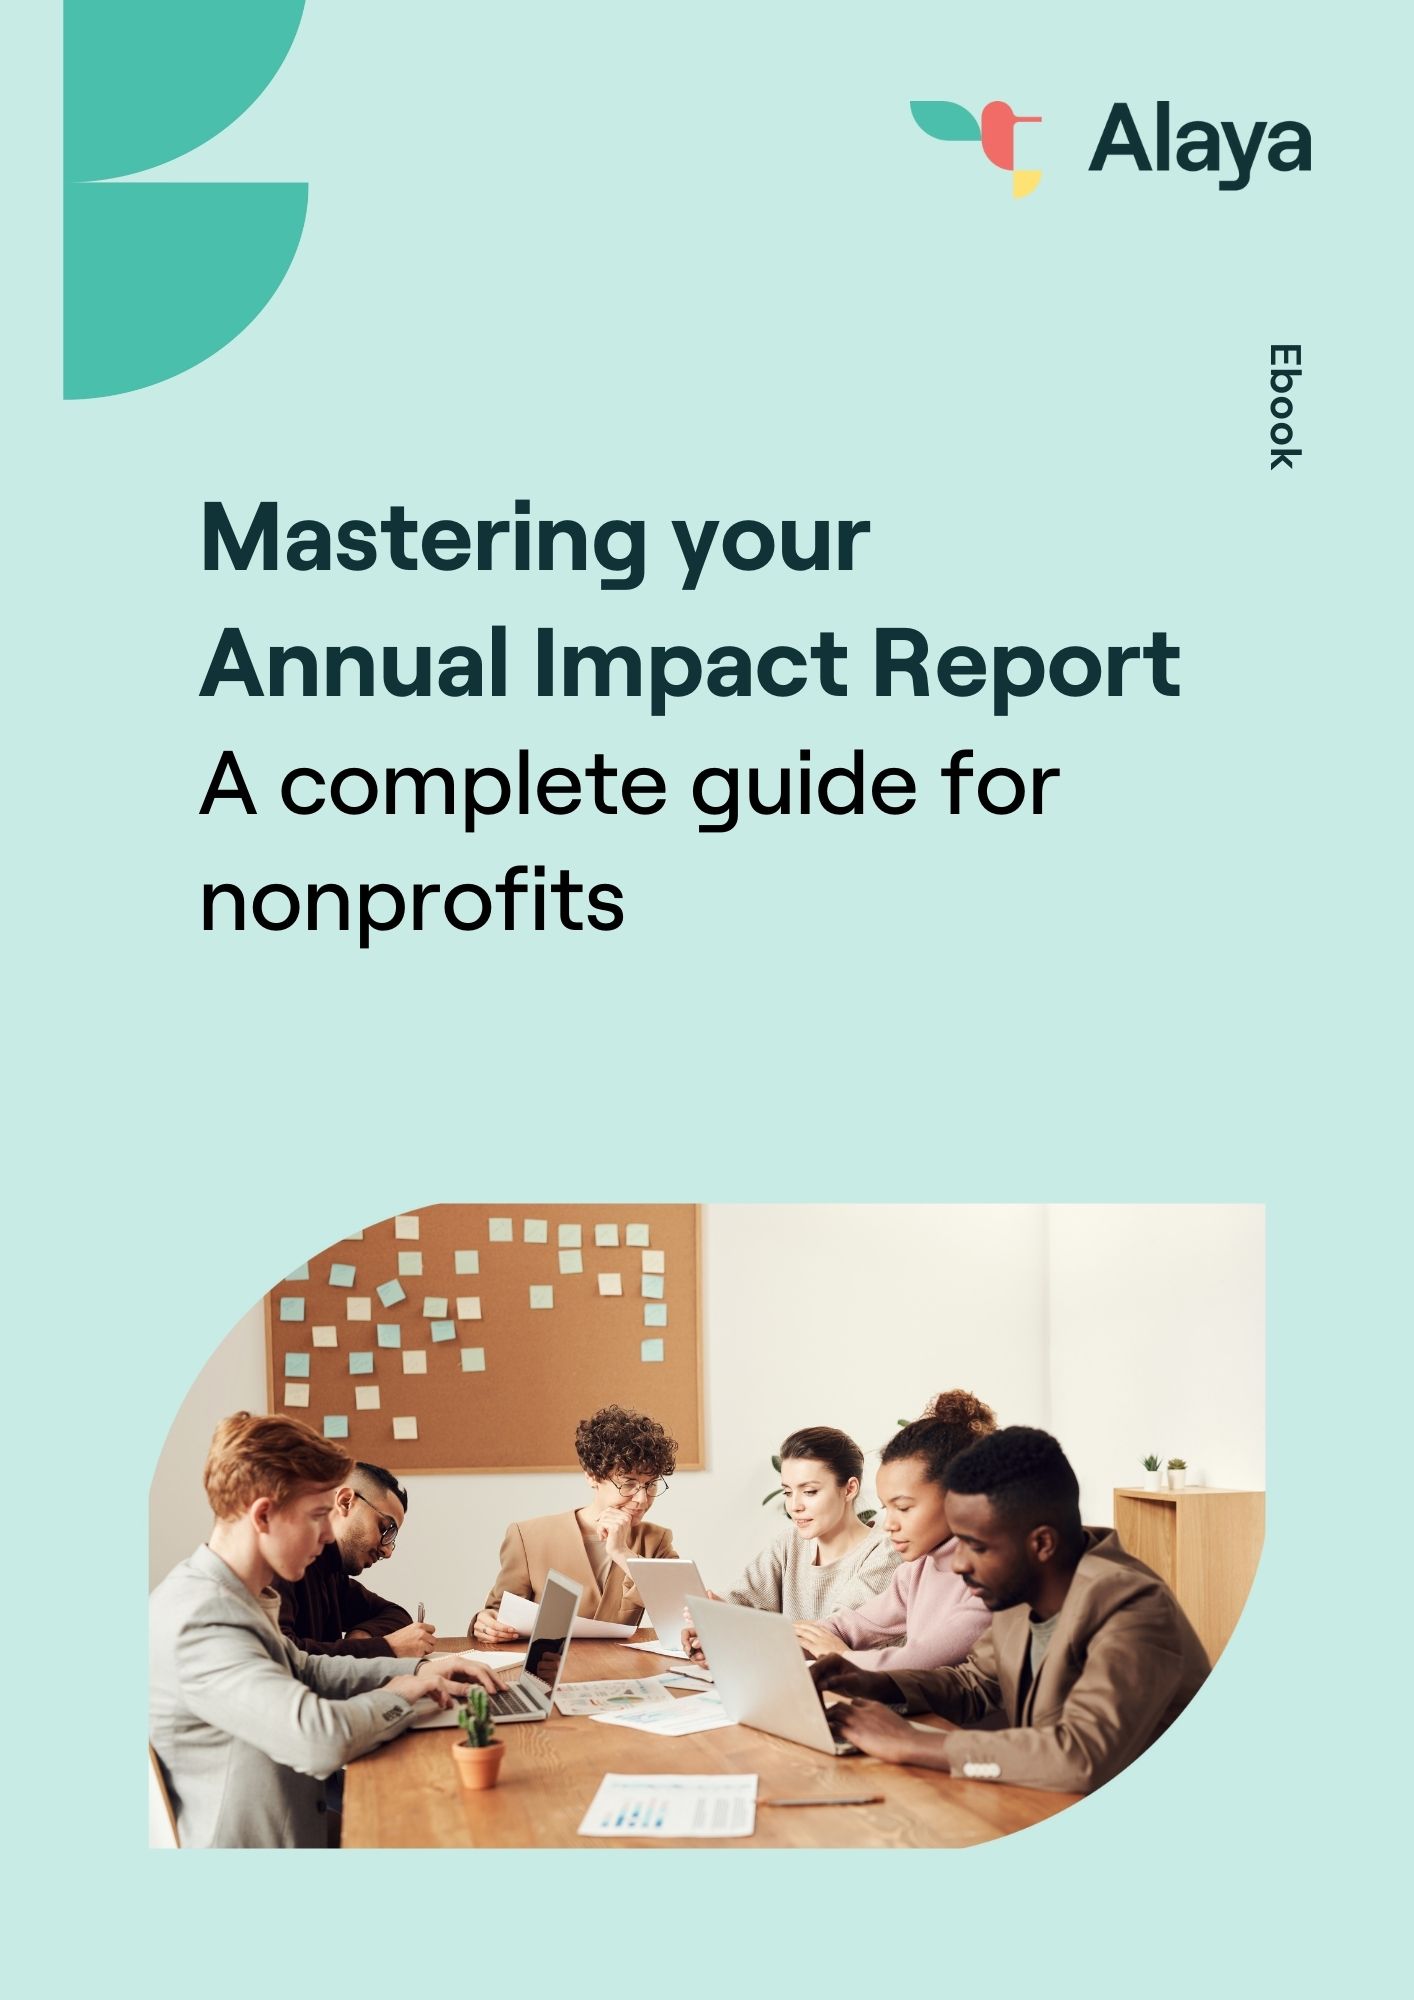 Annual impact report for nonprofits